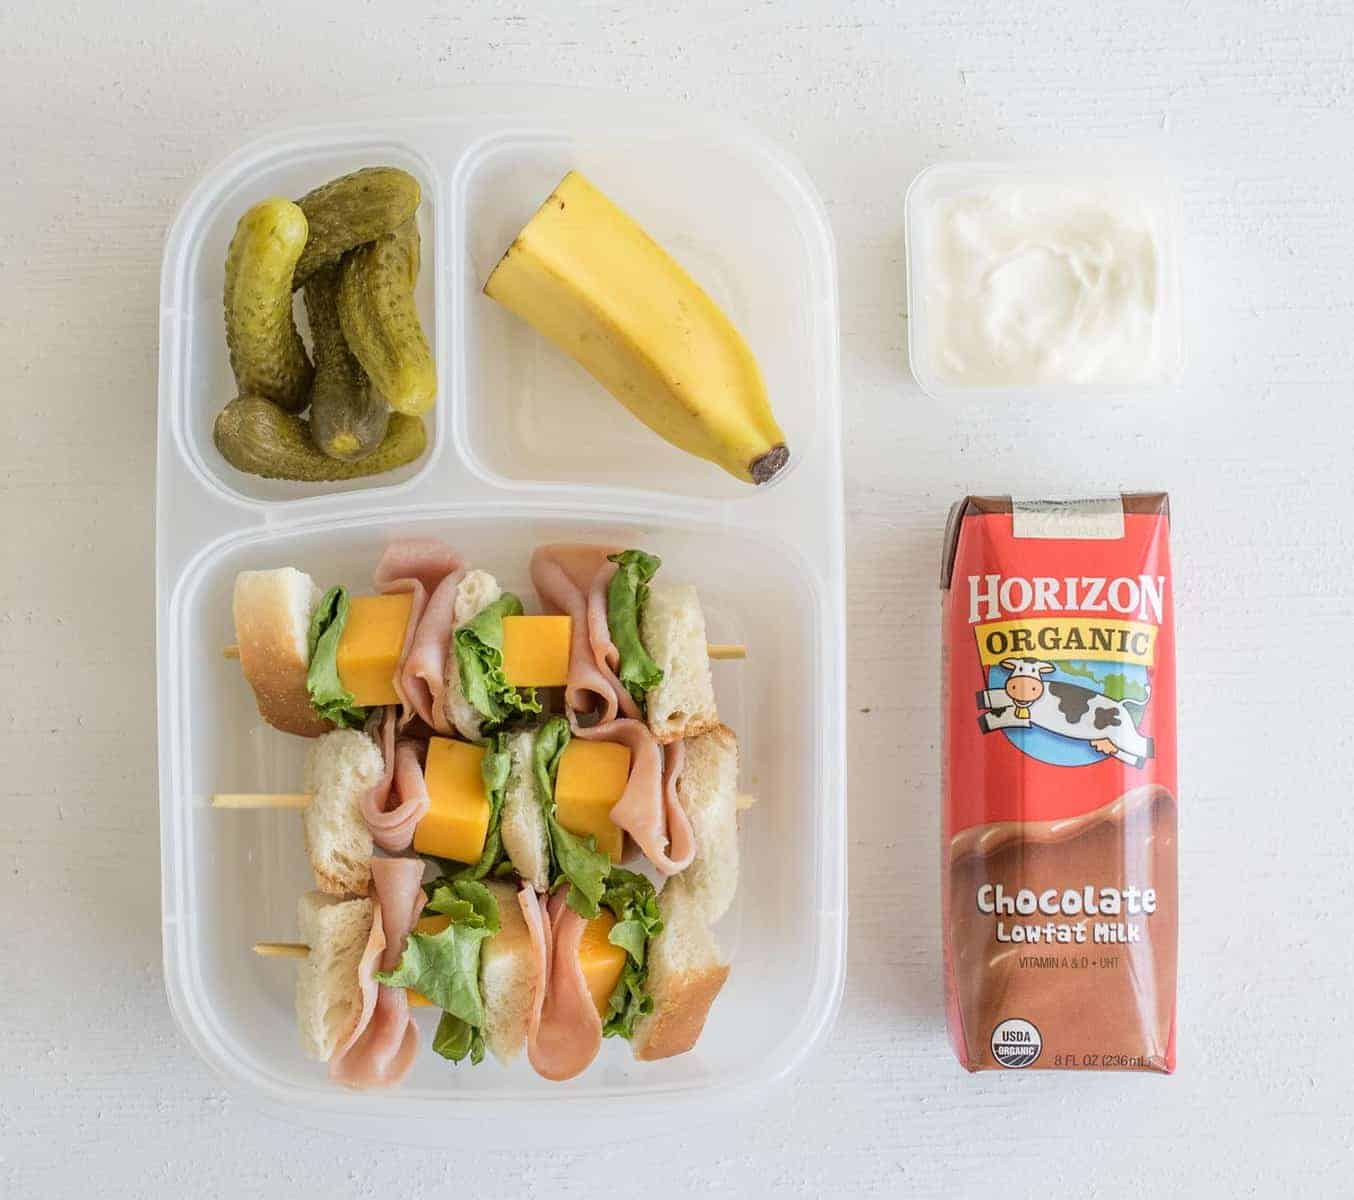 6 Easy "Sandwich-on-a-Stick" Lunch Box Ideas are perfect to take to school or work and are a fun twist on all of your favorite classic sandwiches.